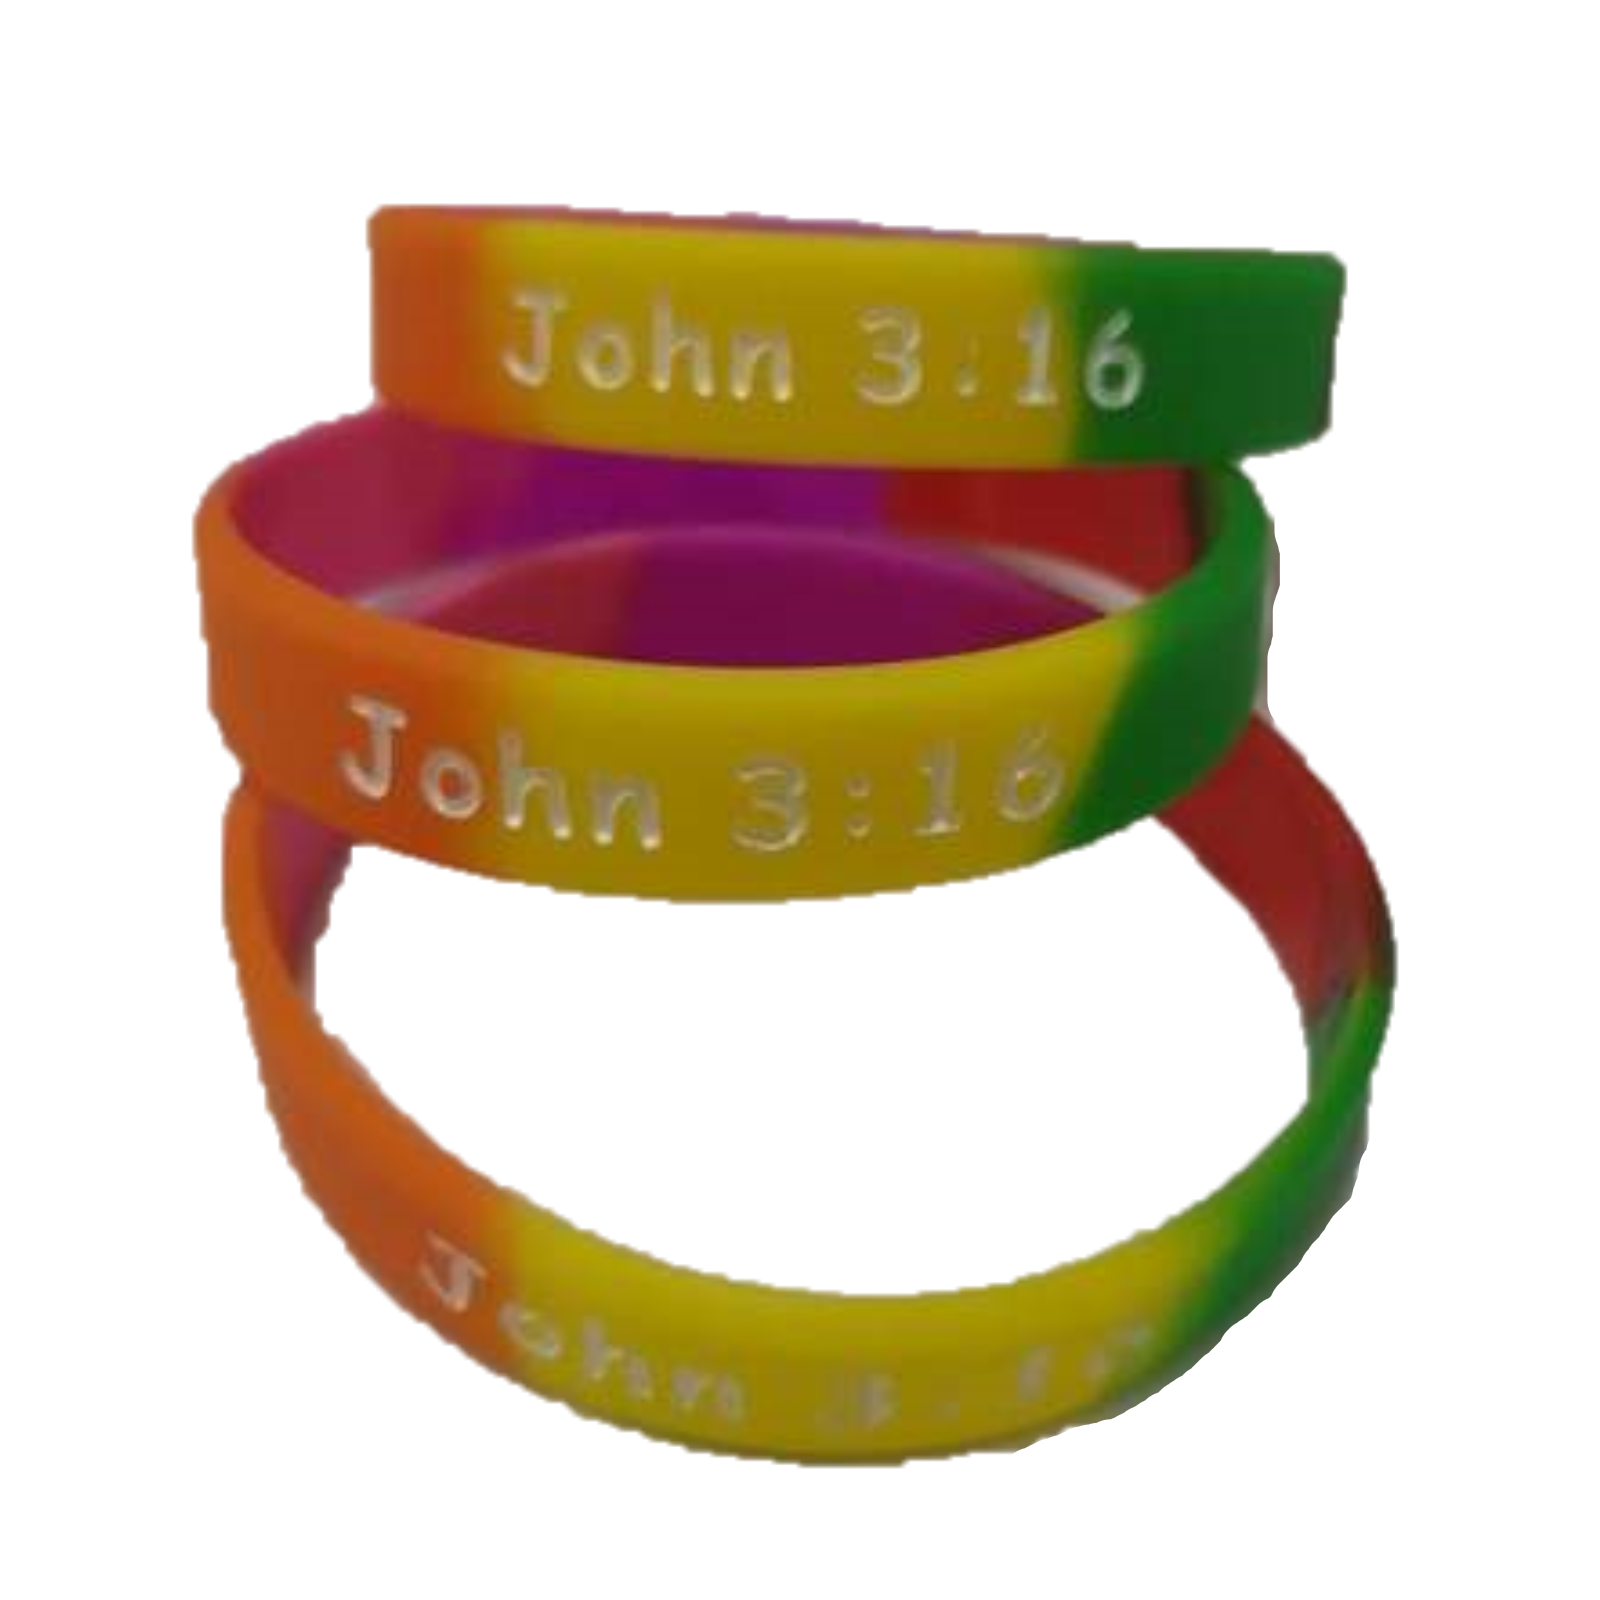 Inkstone Christian Inspirational Bible Silicone Rubber Wristbands -  Motivational Wristbands Bracelets for Men & Women - Personalized Pack of  Durable Rubber Band Bracelets : Amazon.in: Toys & Games